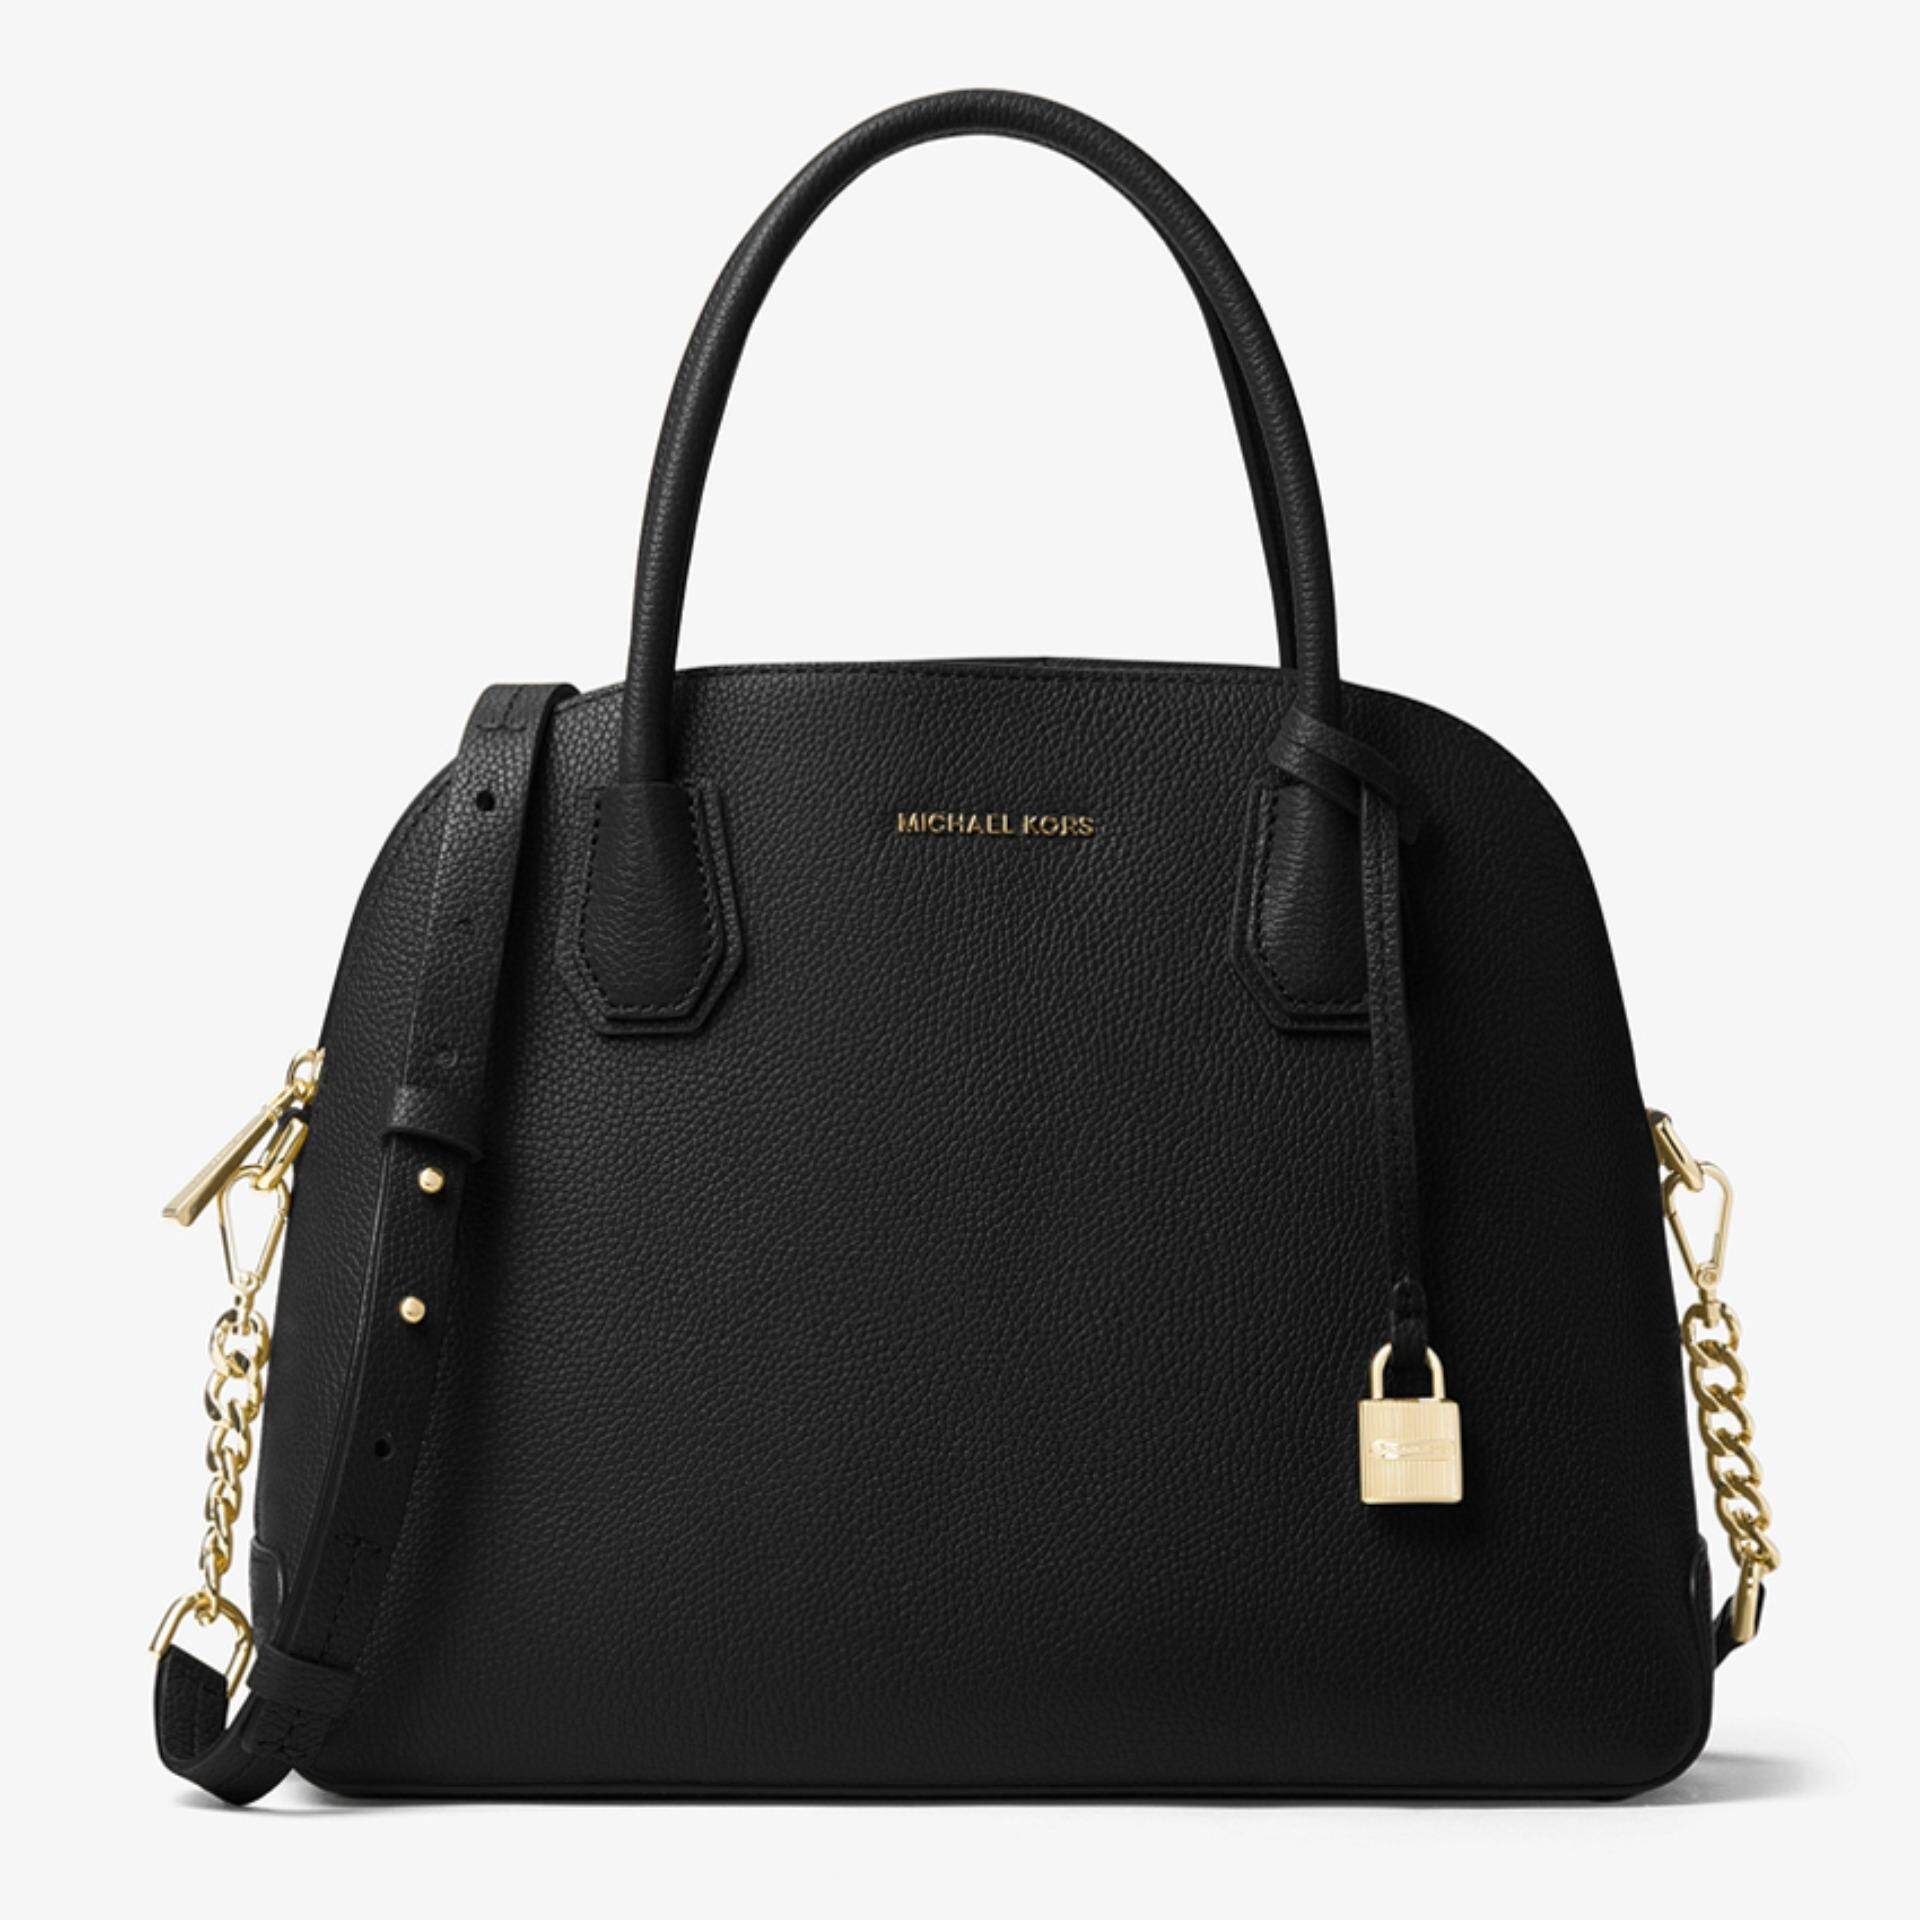 Michael Kors Products With Best Online Price In Malaysia